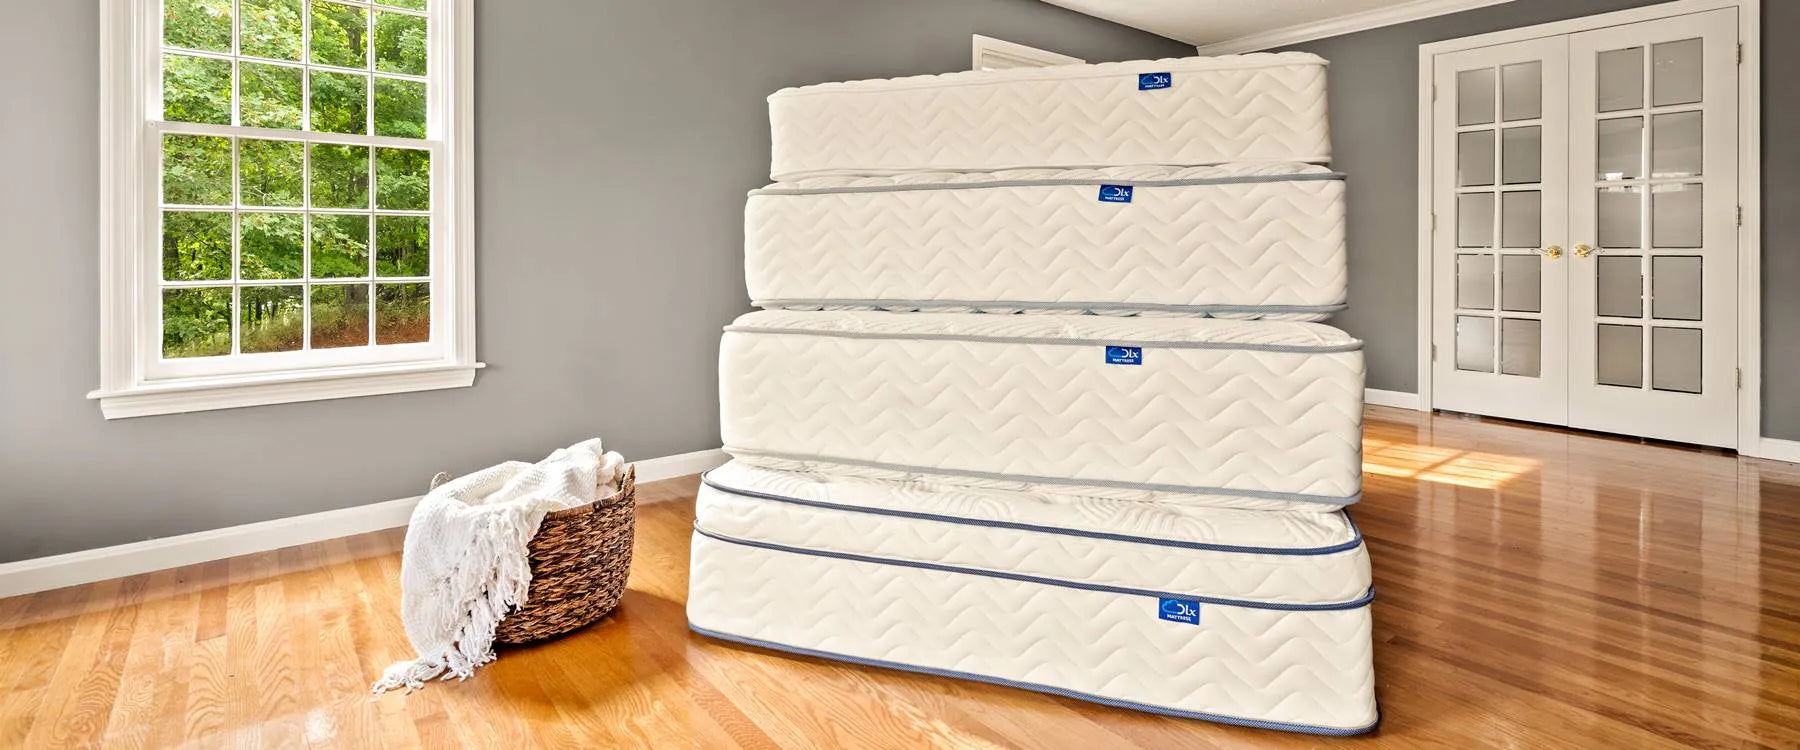 A display of DLX mattresses history, representing the range and evolution in the "About Us" section.